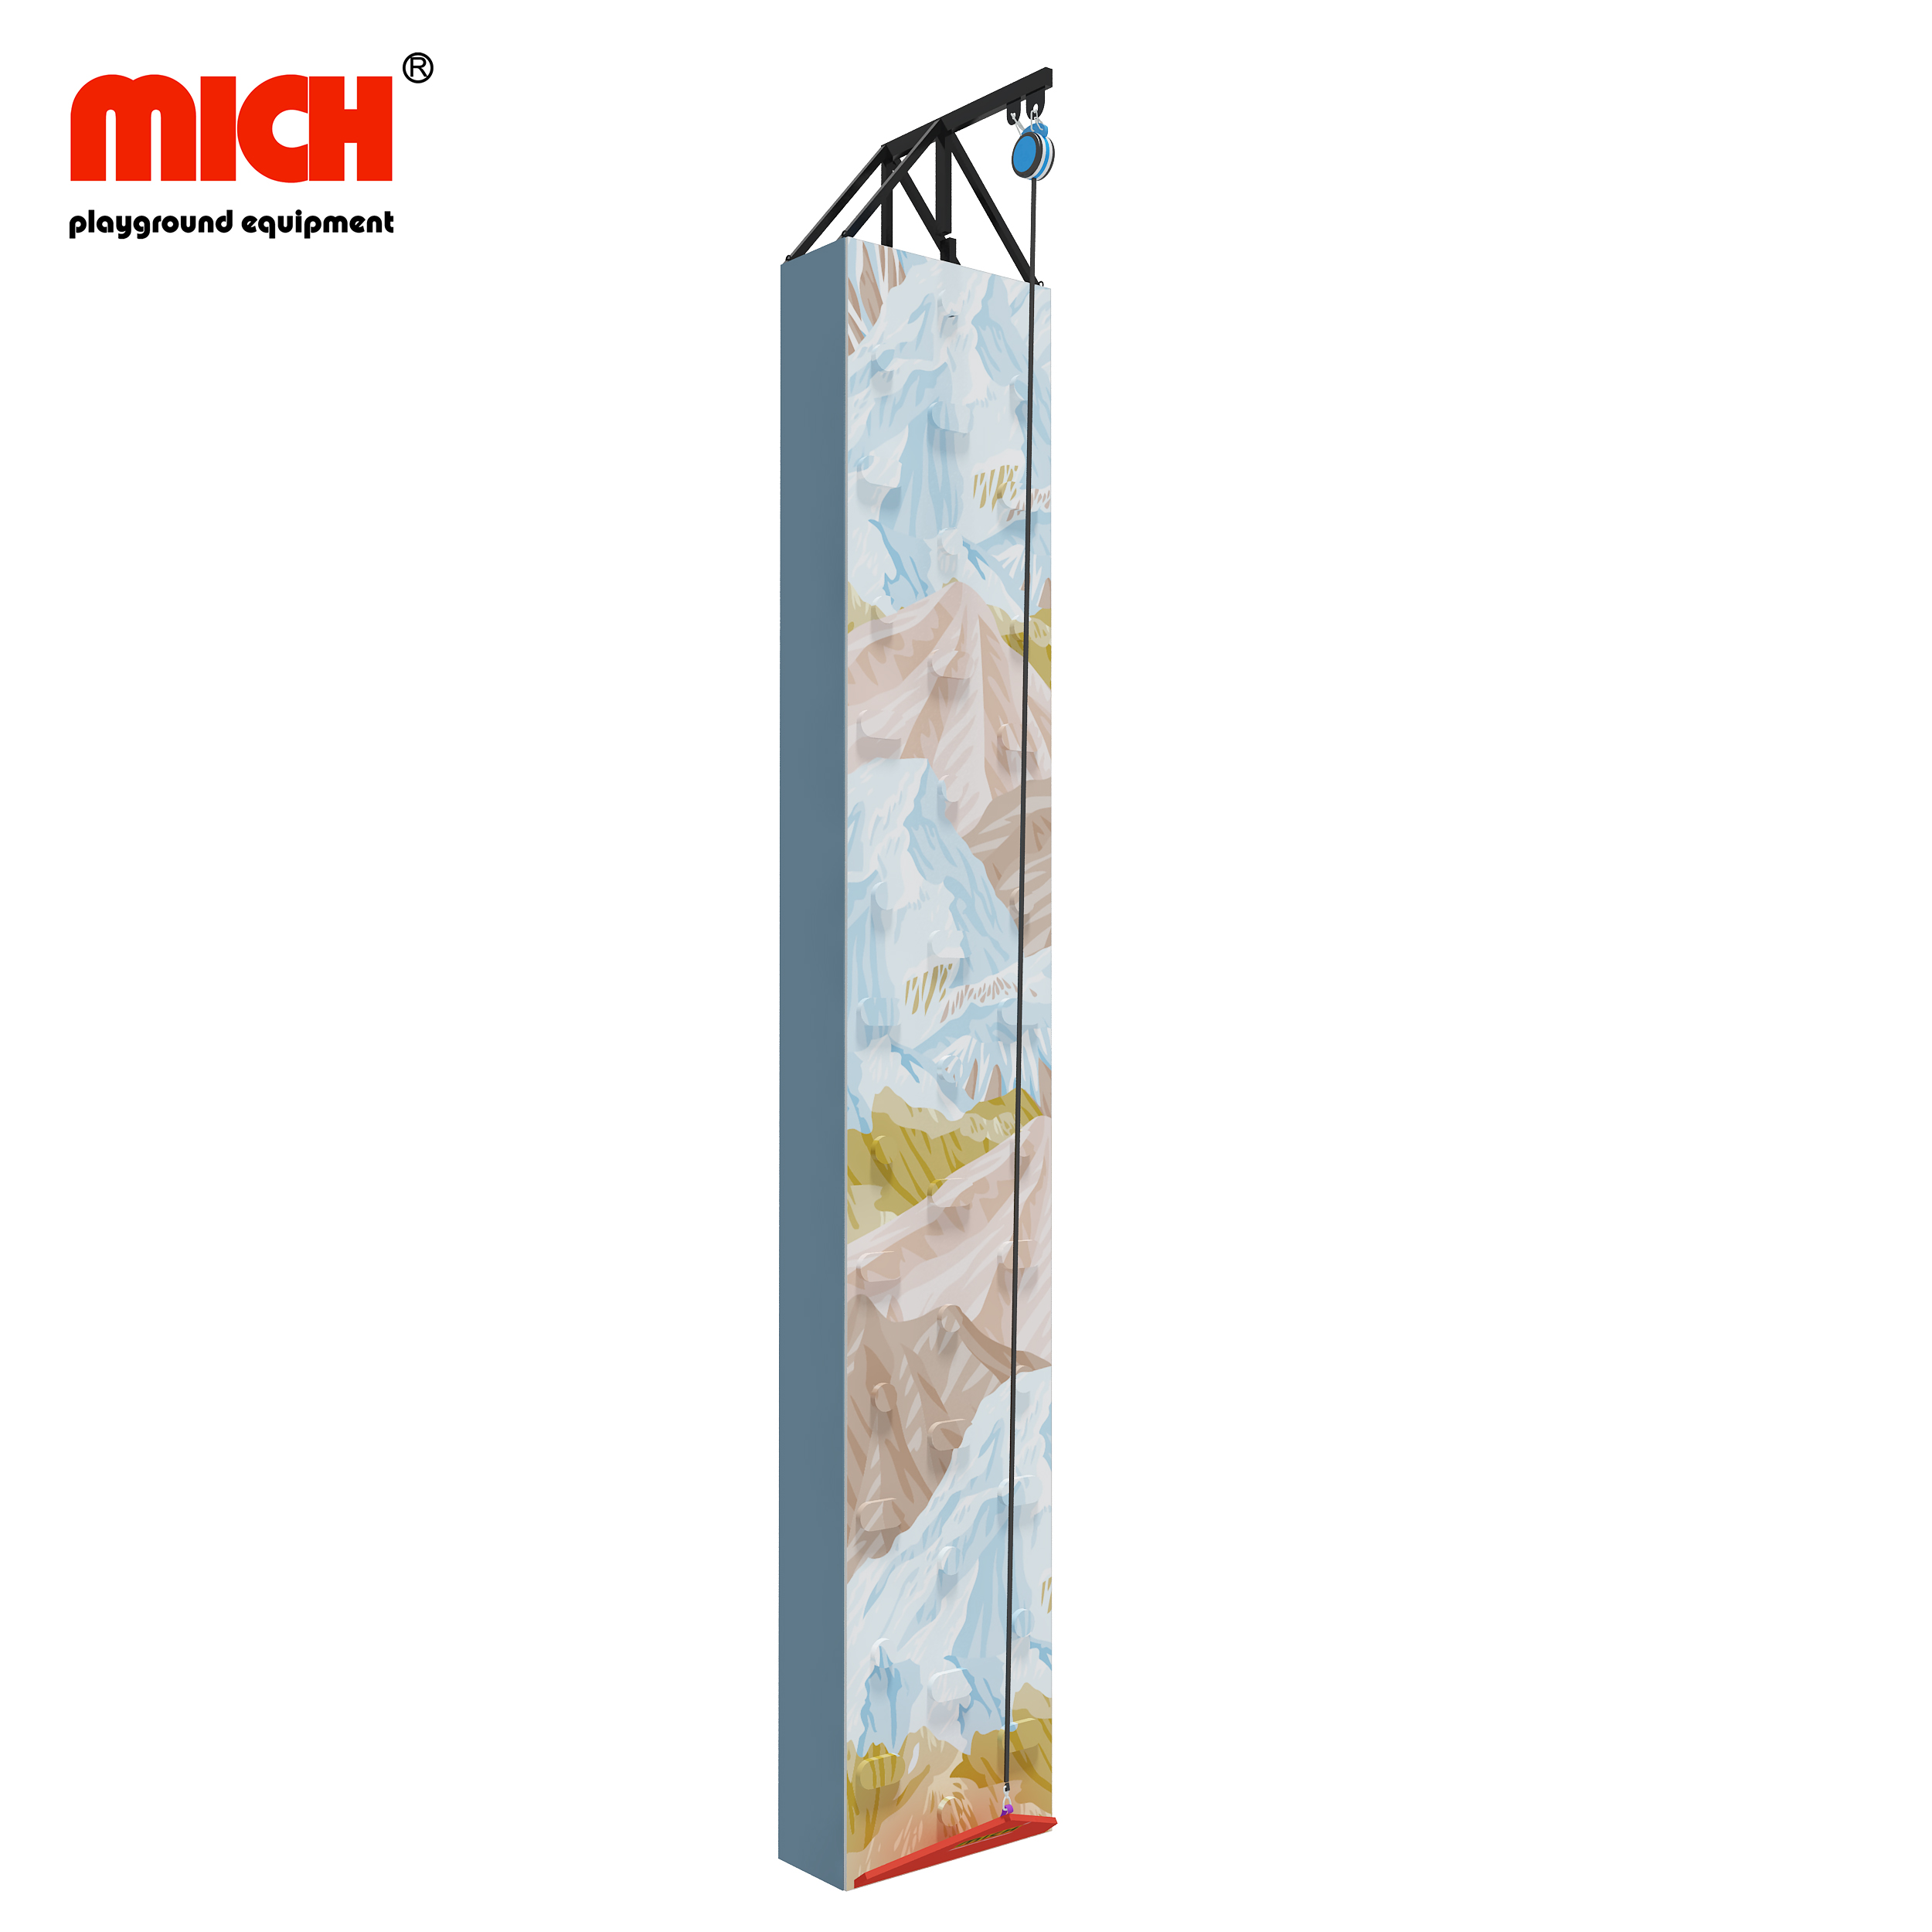 Mich Latest Design of Indoor Climbing Wall Equipment